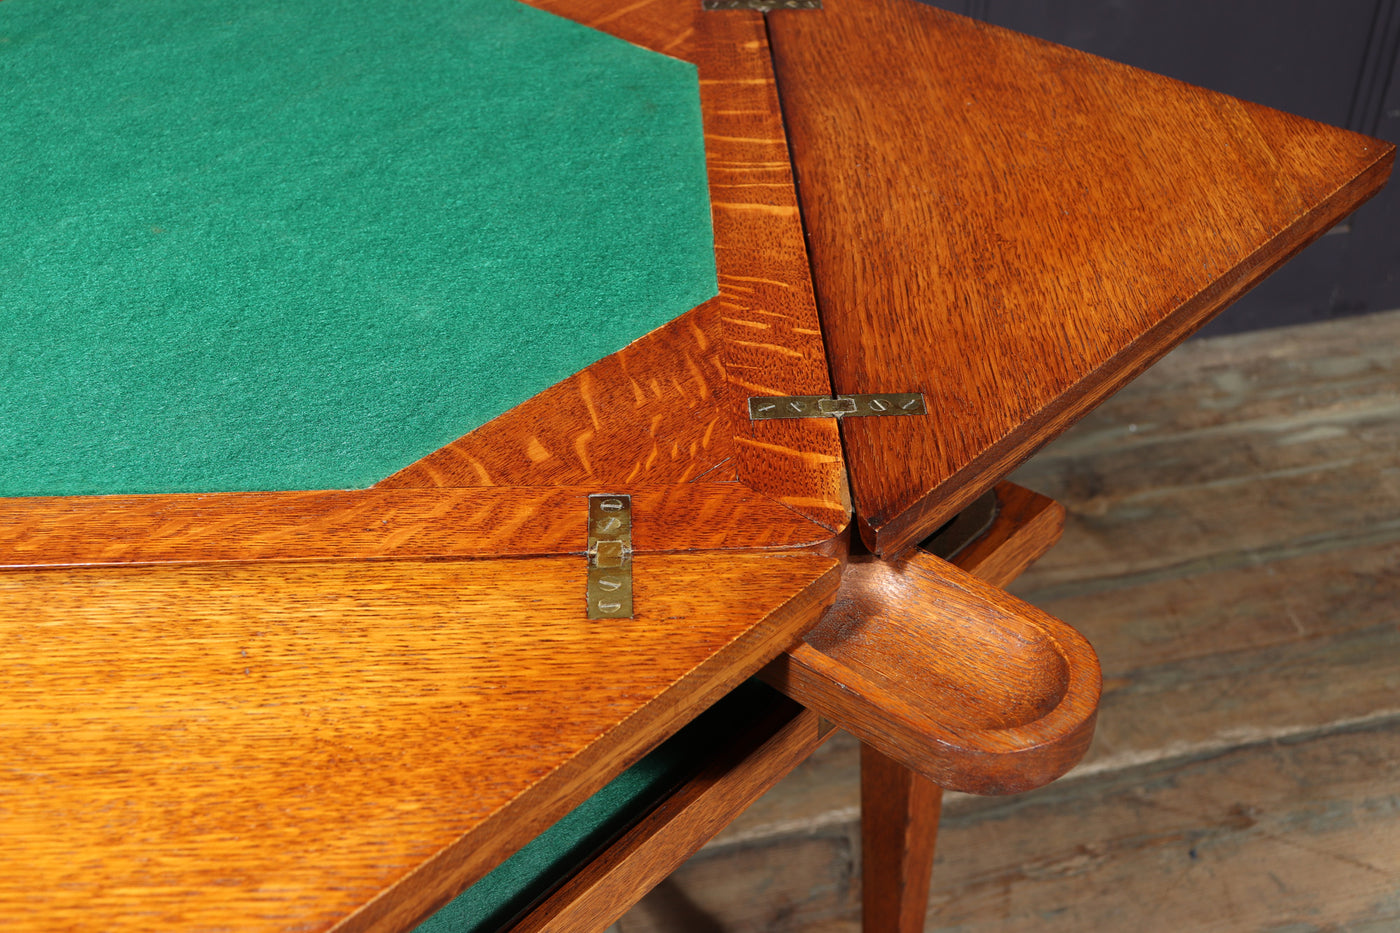 Arts And Crafts Oak Envelope Card Table